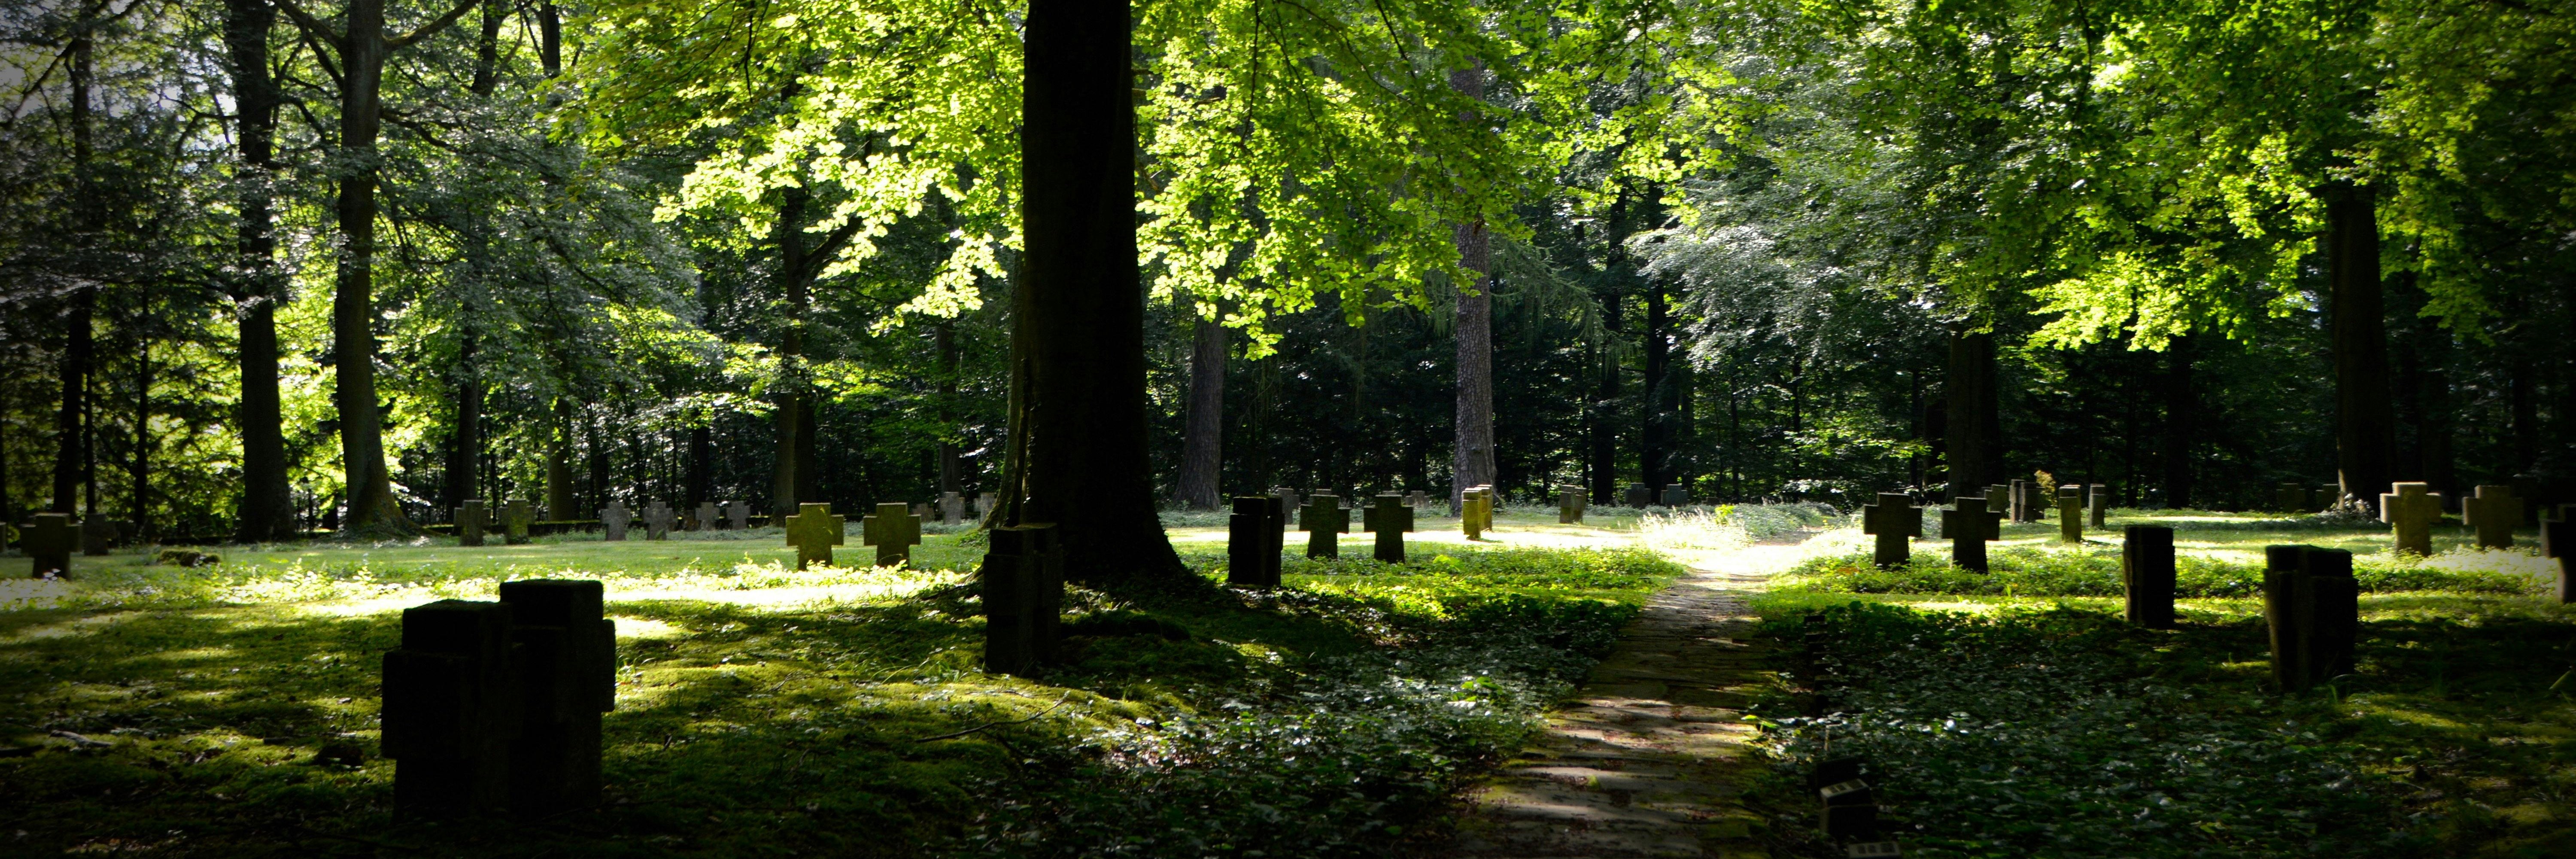 A picture of a cemetery in the forest